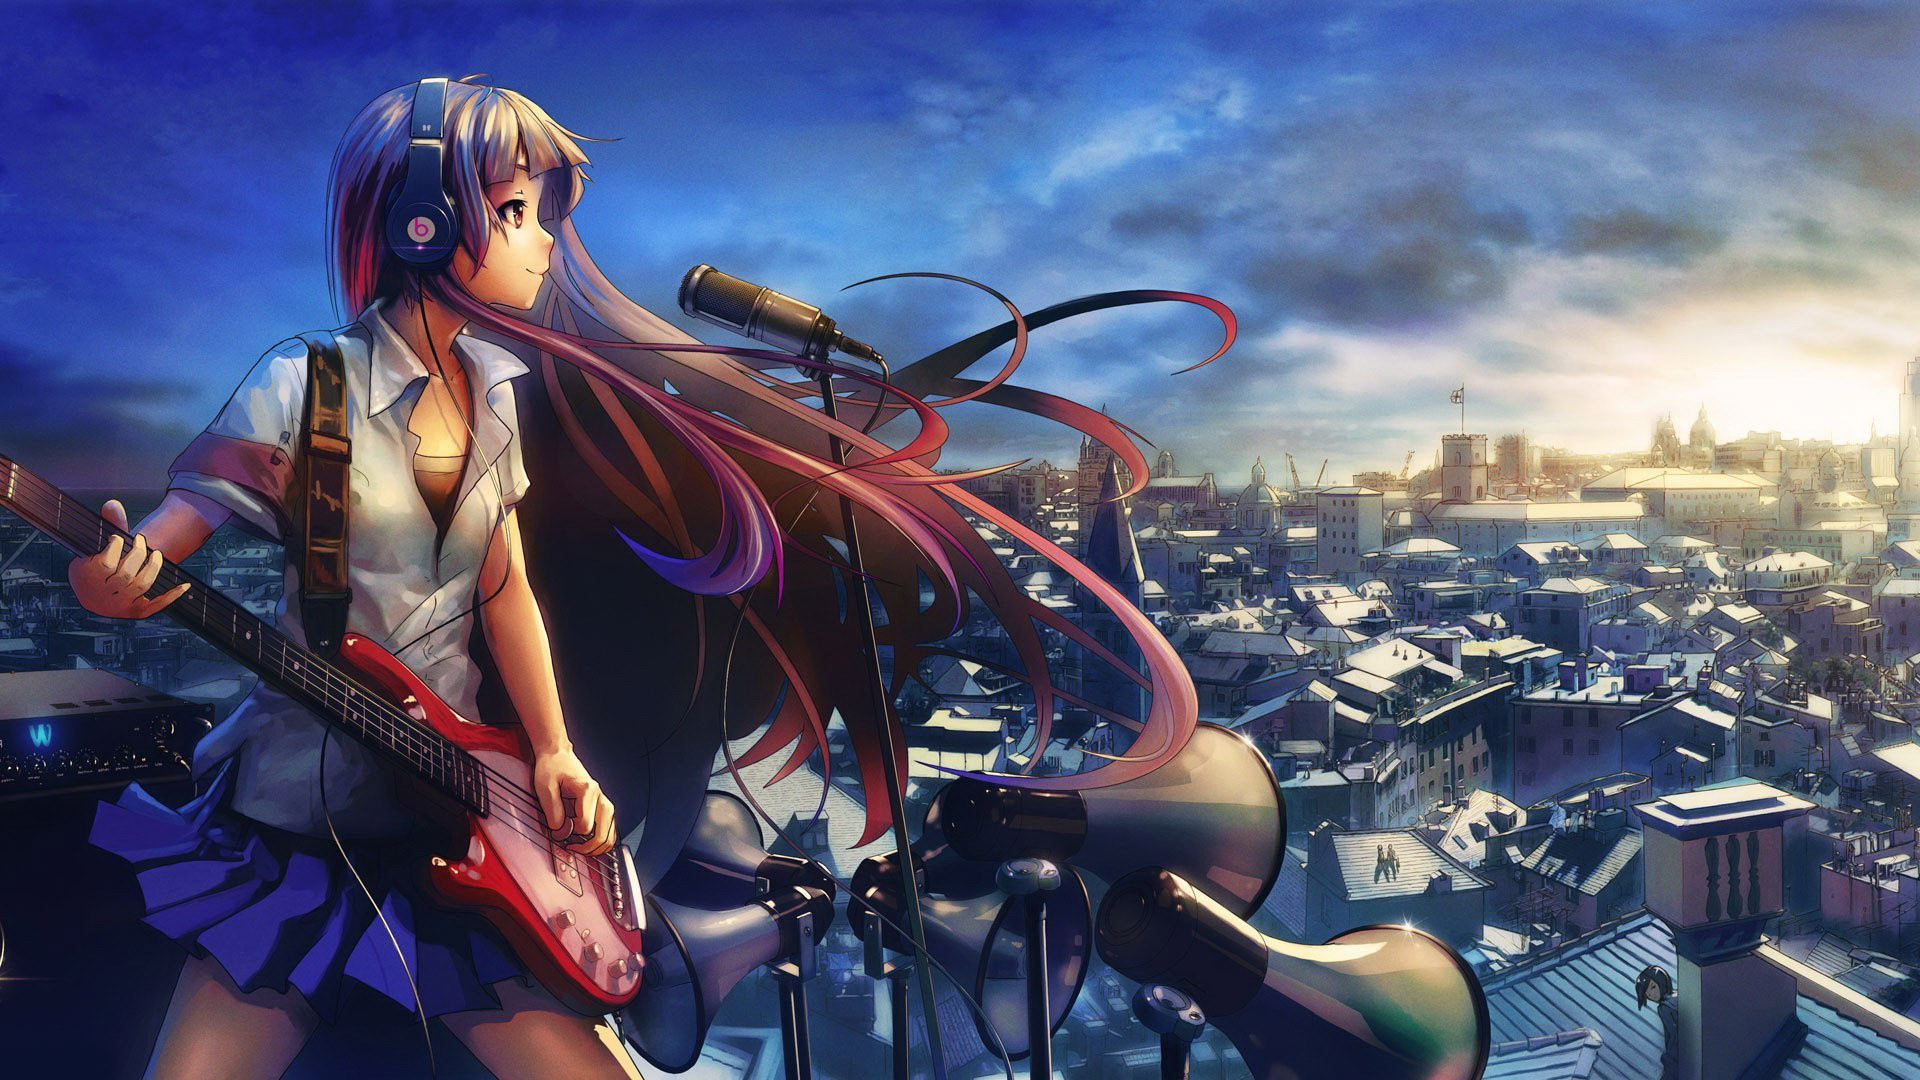 213200+ Anime HD Wallpapers and Backgrounds